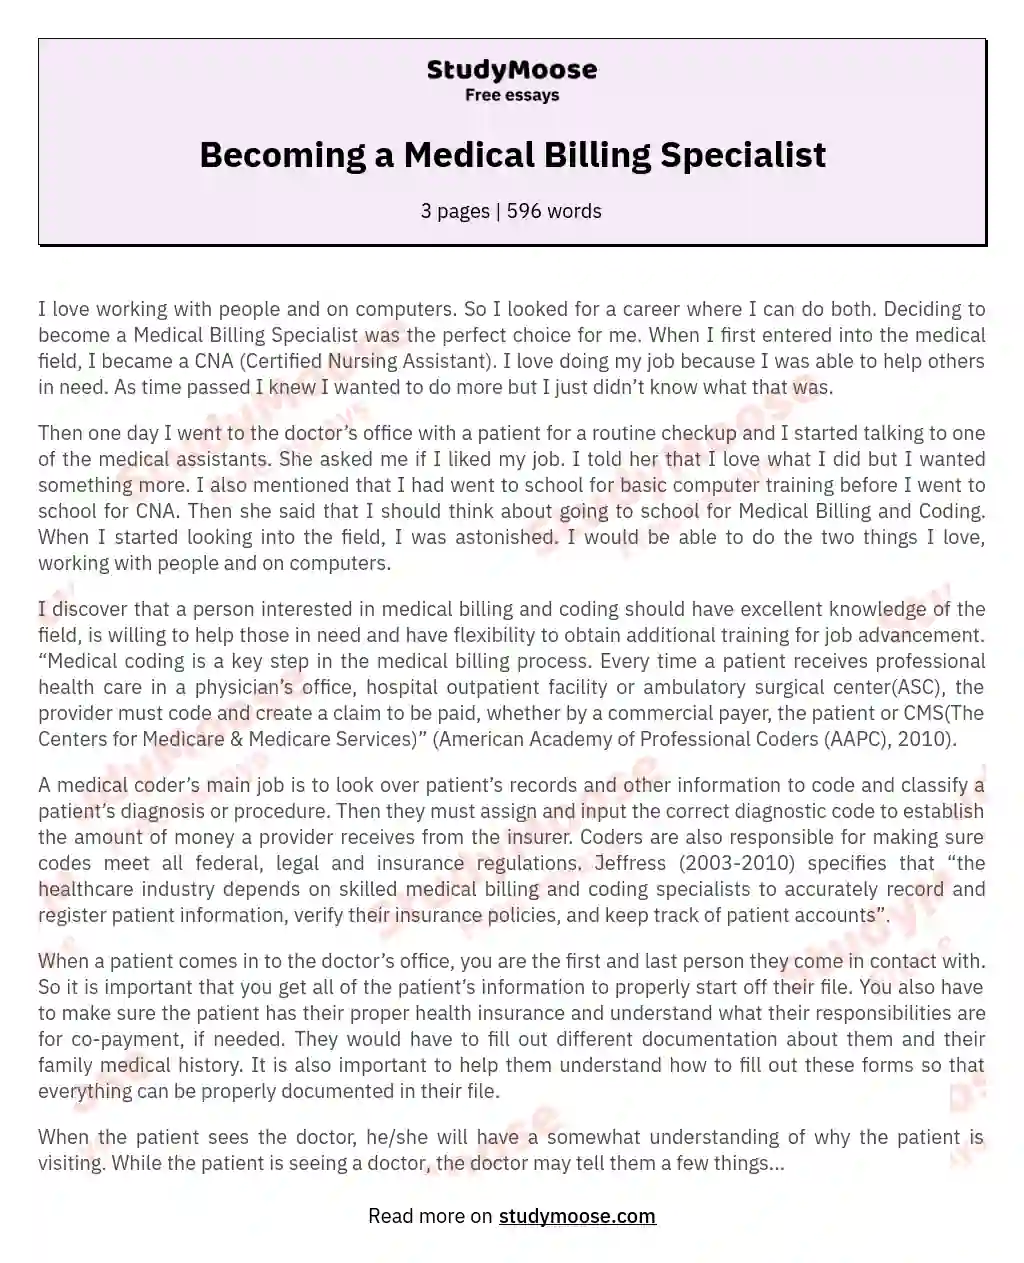 Becoming a Medical Billing Specialist